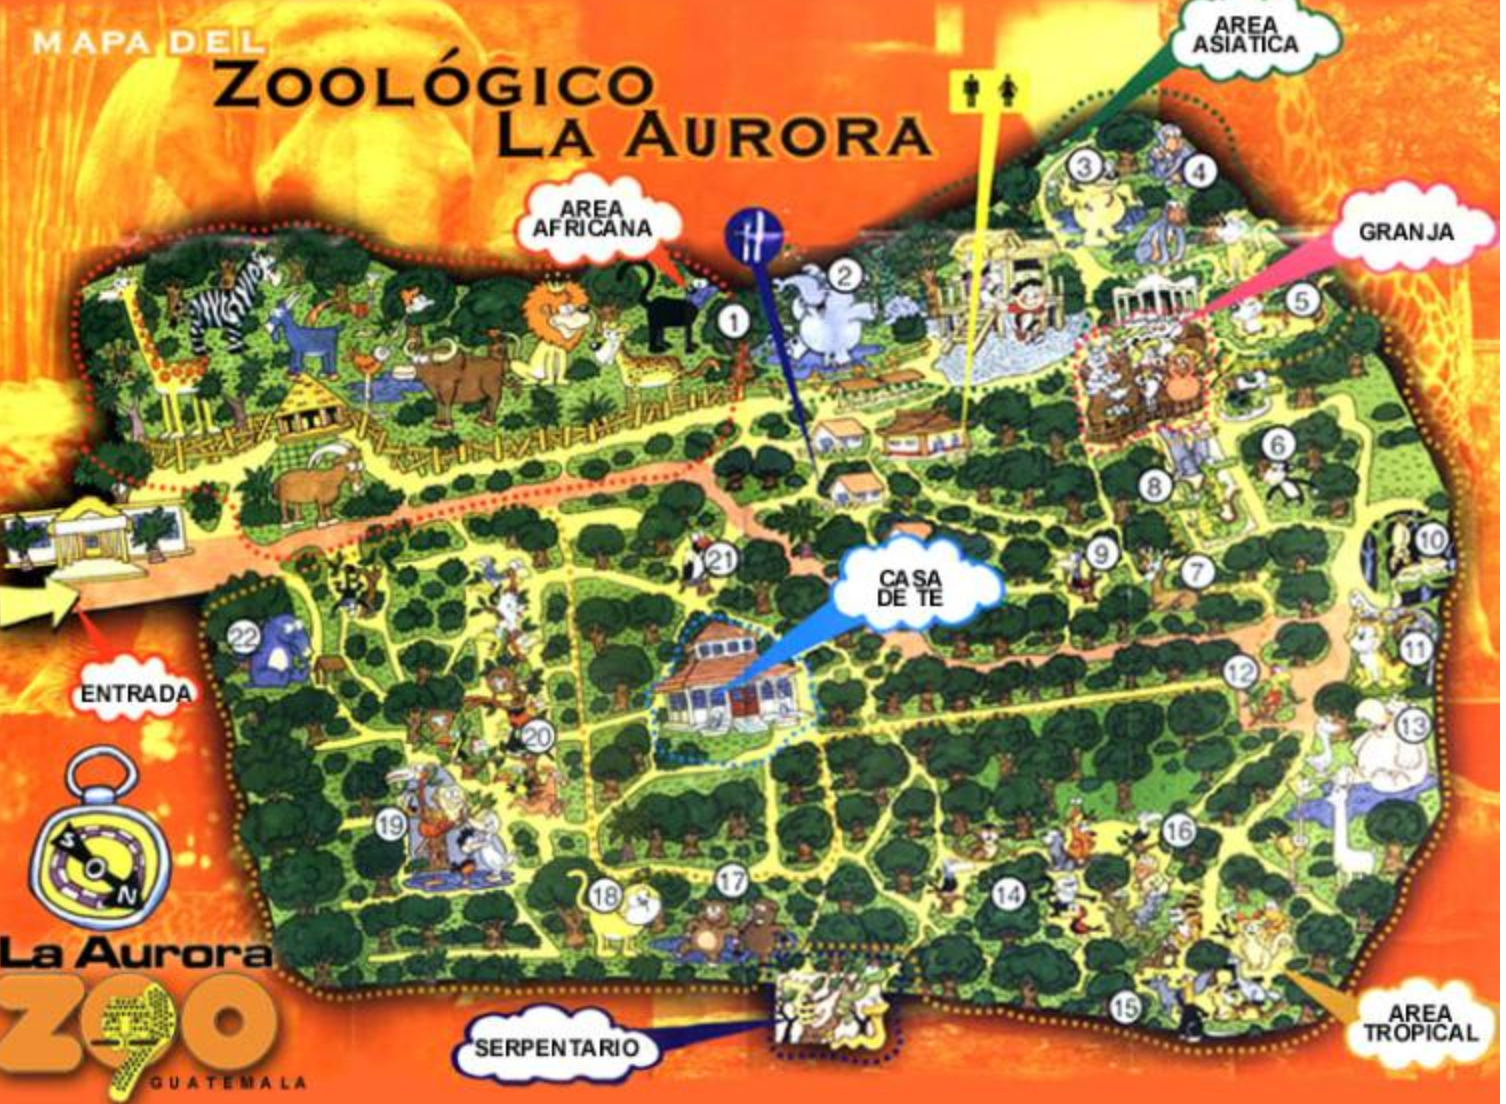 The zoo has several exhibit area and can be included in any guatemala city tour or day trips.